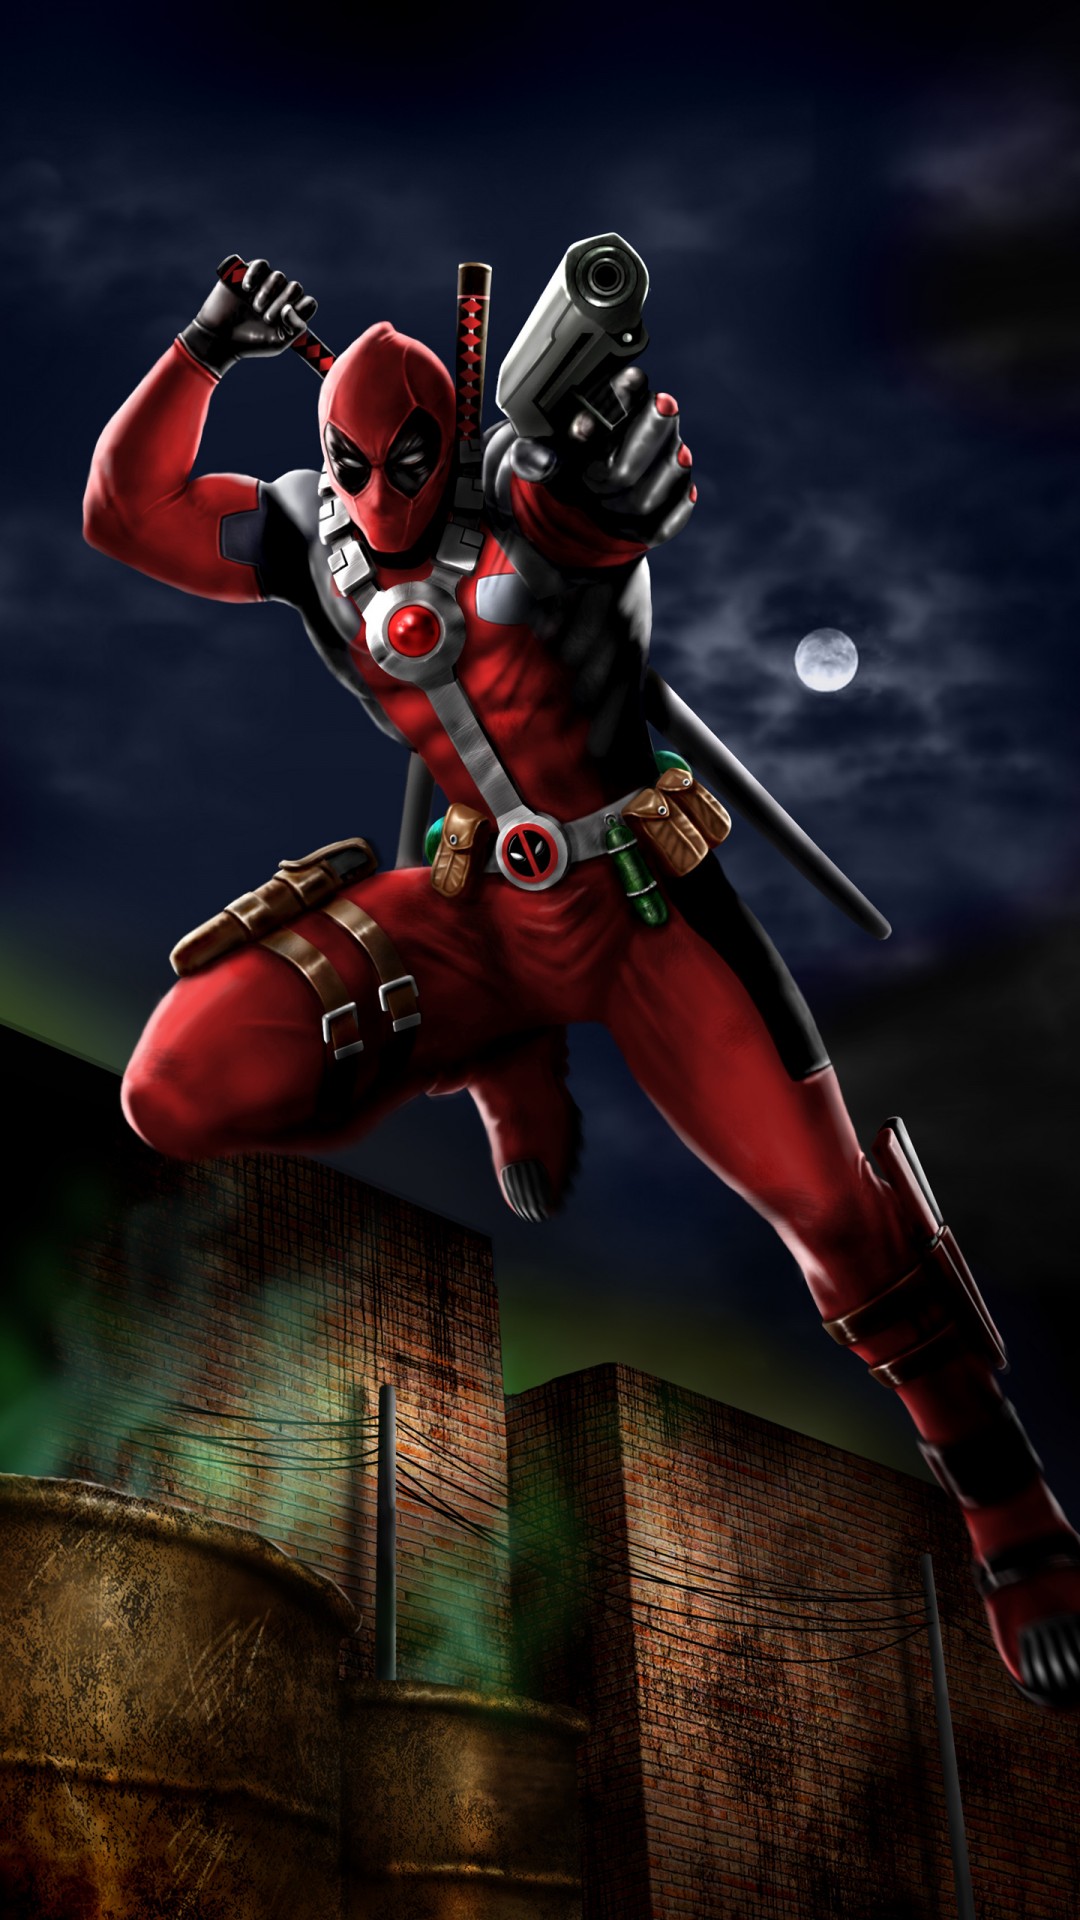 deadpool wallpaper for android,fictional character,superhero,action adventure game,cg artwork,games